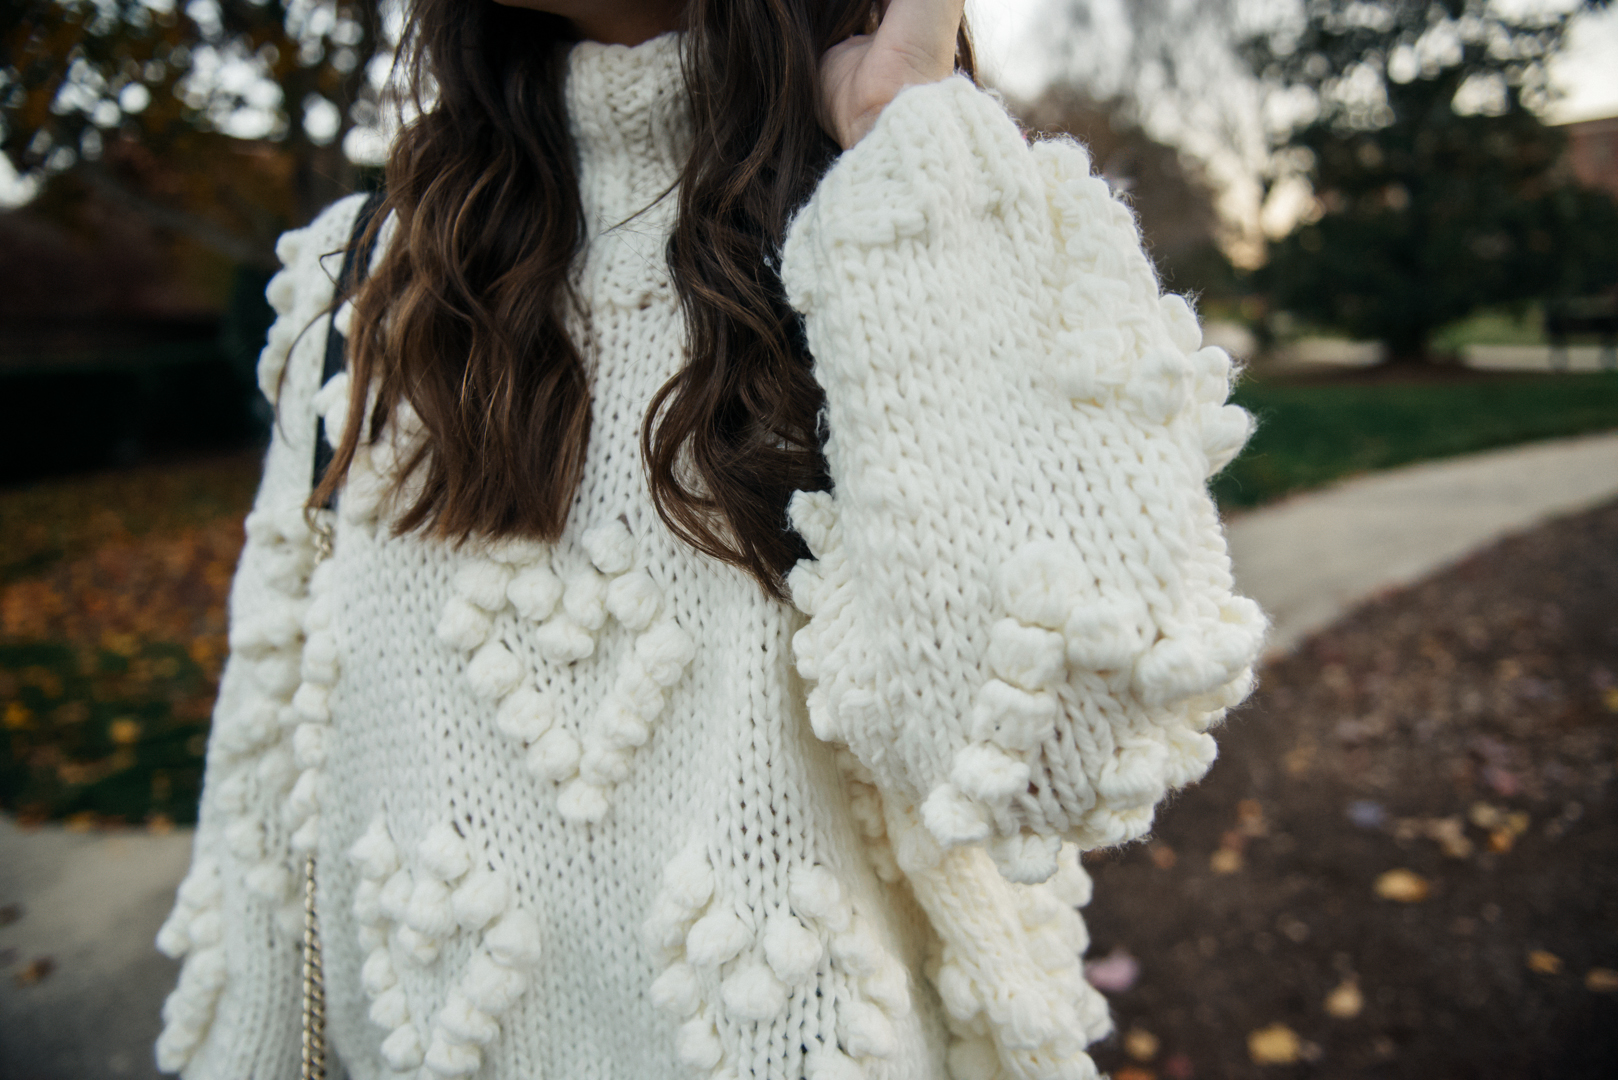 Oversized Chicwish sweater for the winter season